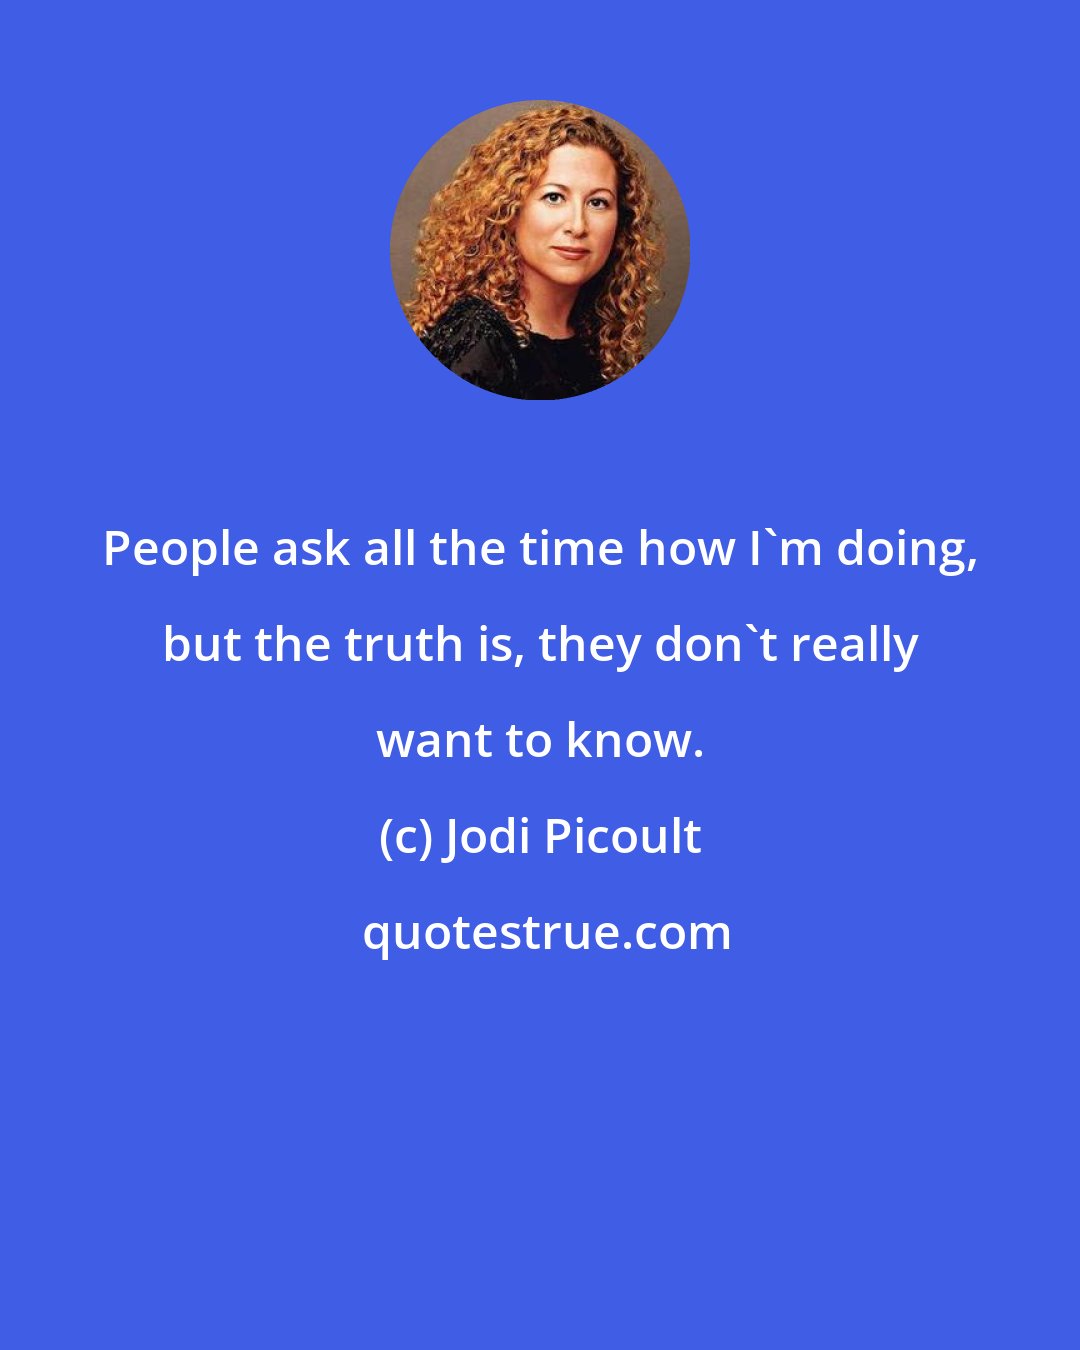 Jodi Picoult: People ask all the time how I'm doing, but the truth is, they don't really want to know.